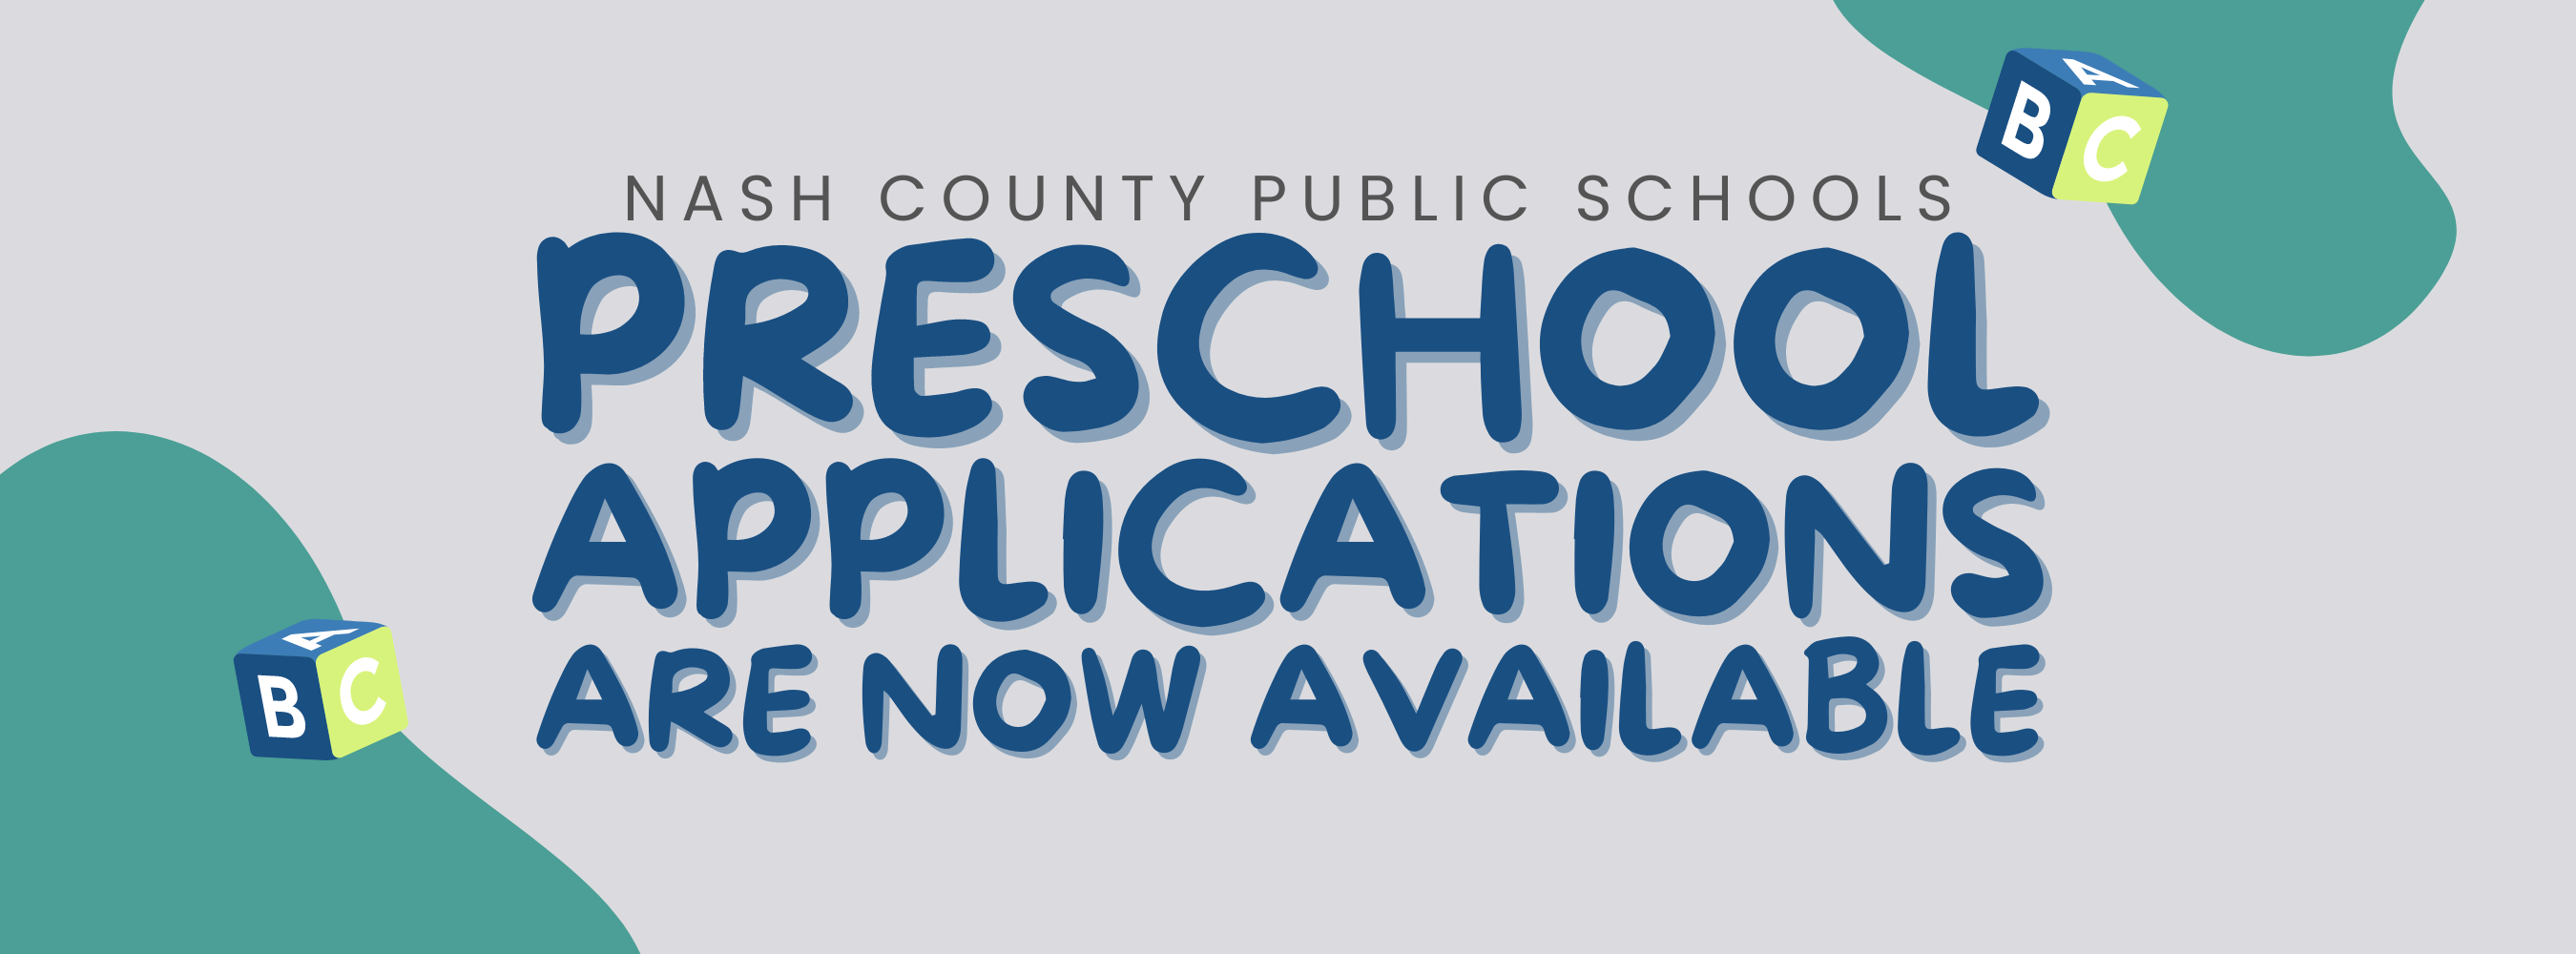 NCPS Preschool applicaiton are now available